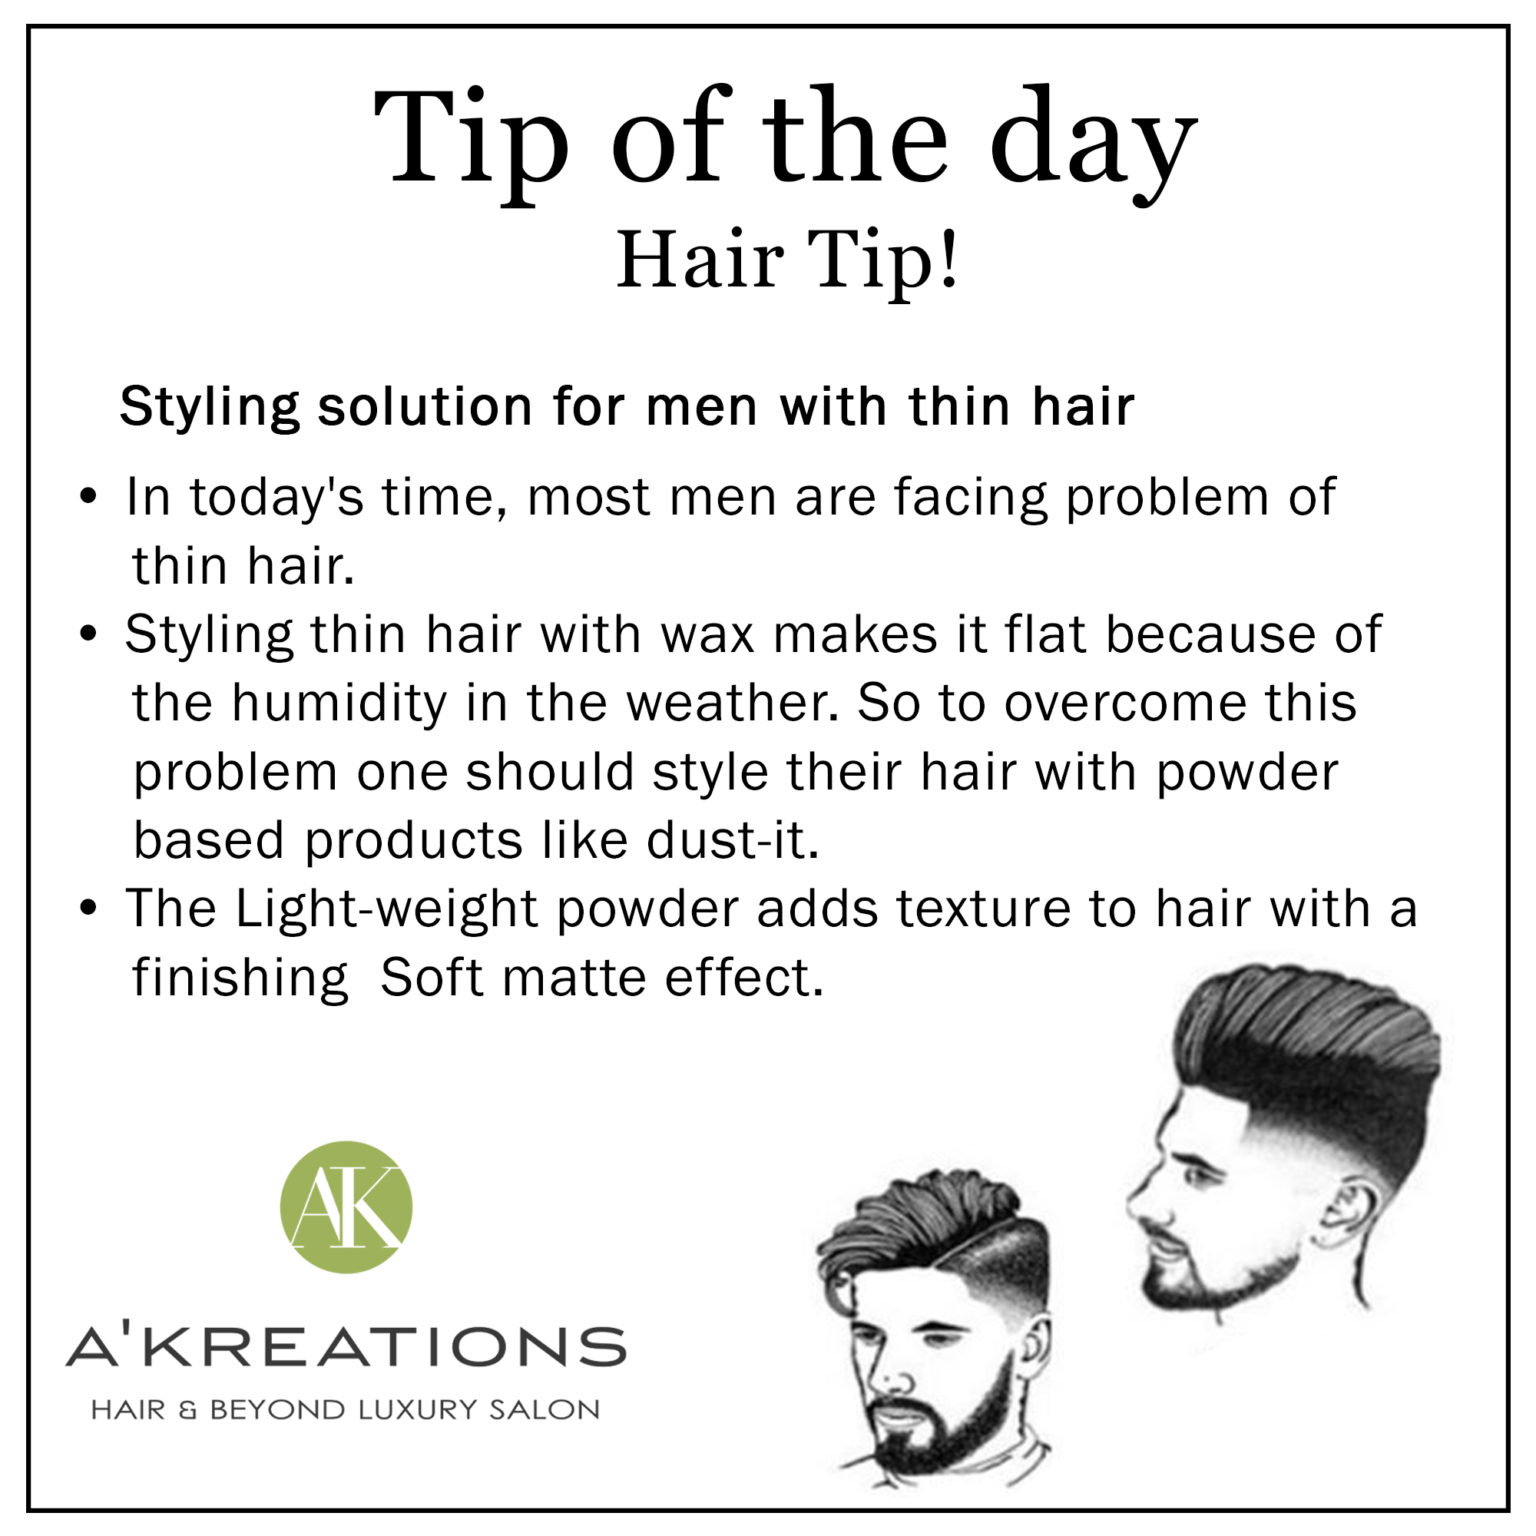 Styling solution for men with thin hair | Blog - A’Kreations Luxury Salon